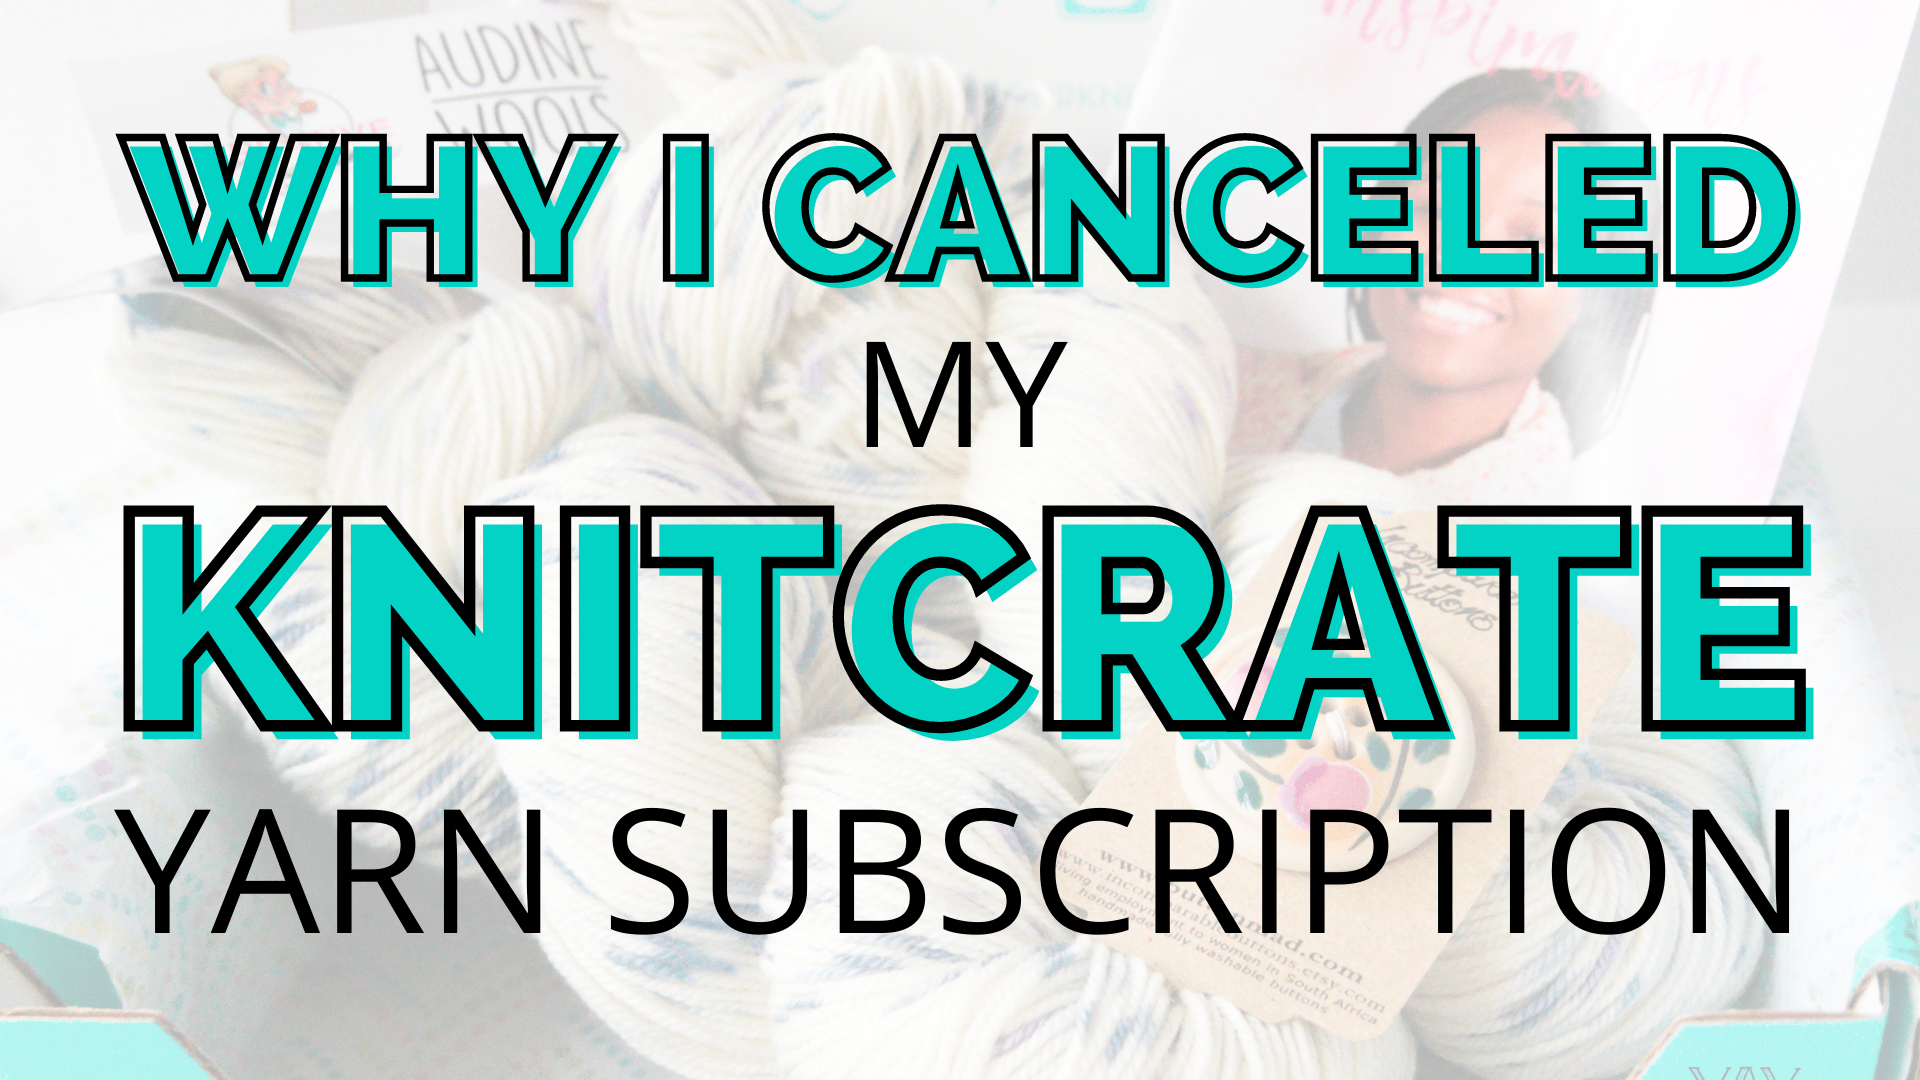 Why I Canceled My KnitCrate Yarn Subscription after LOVING it for 3 years